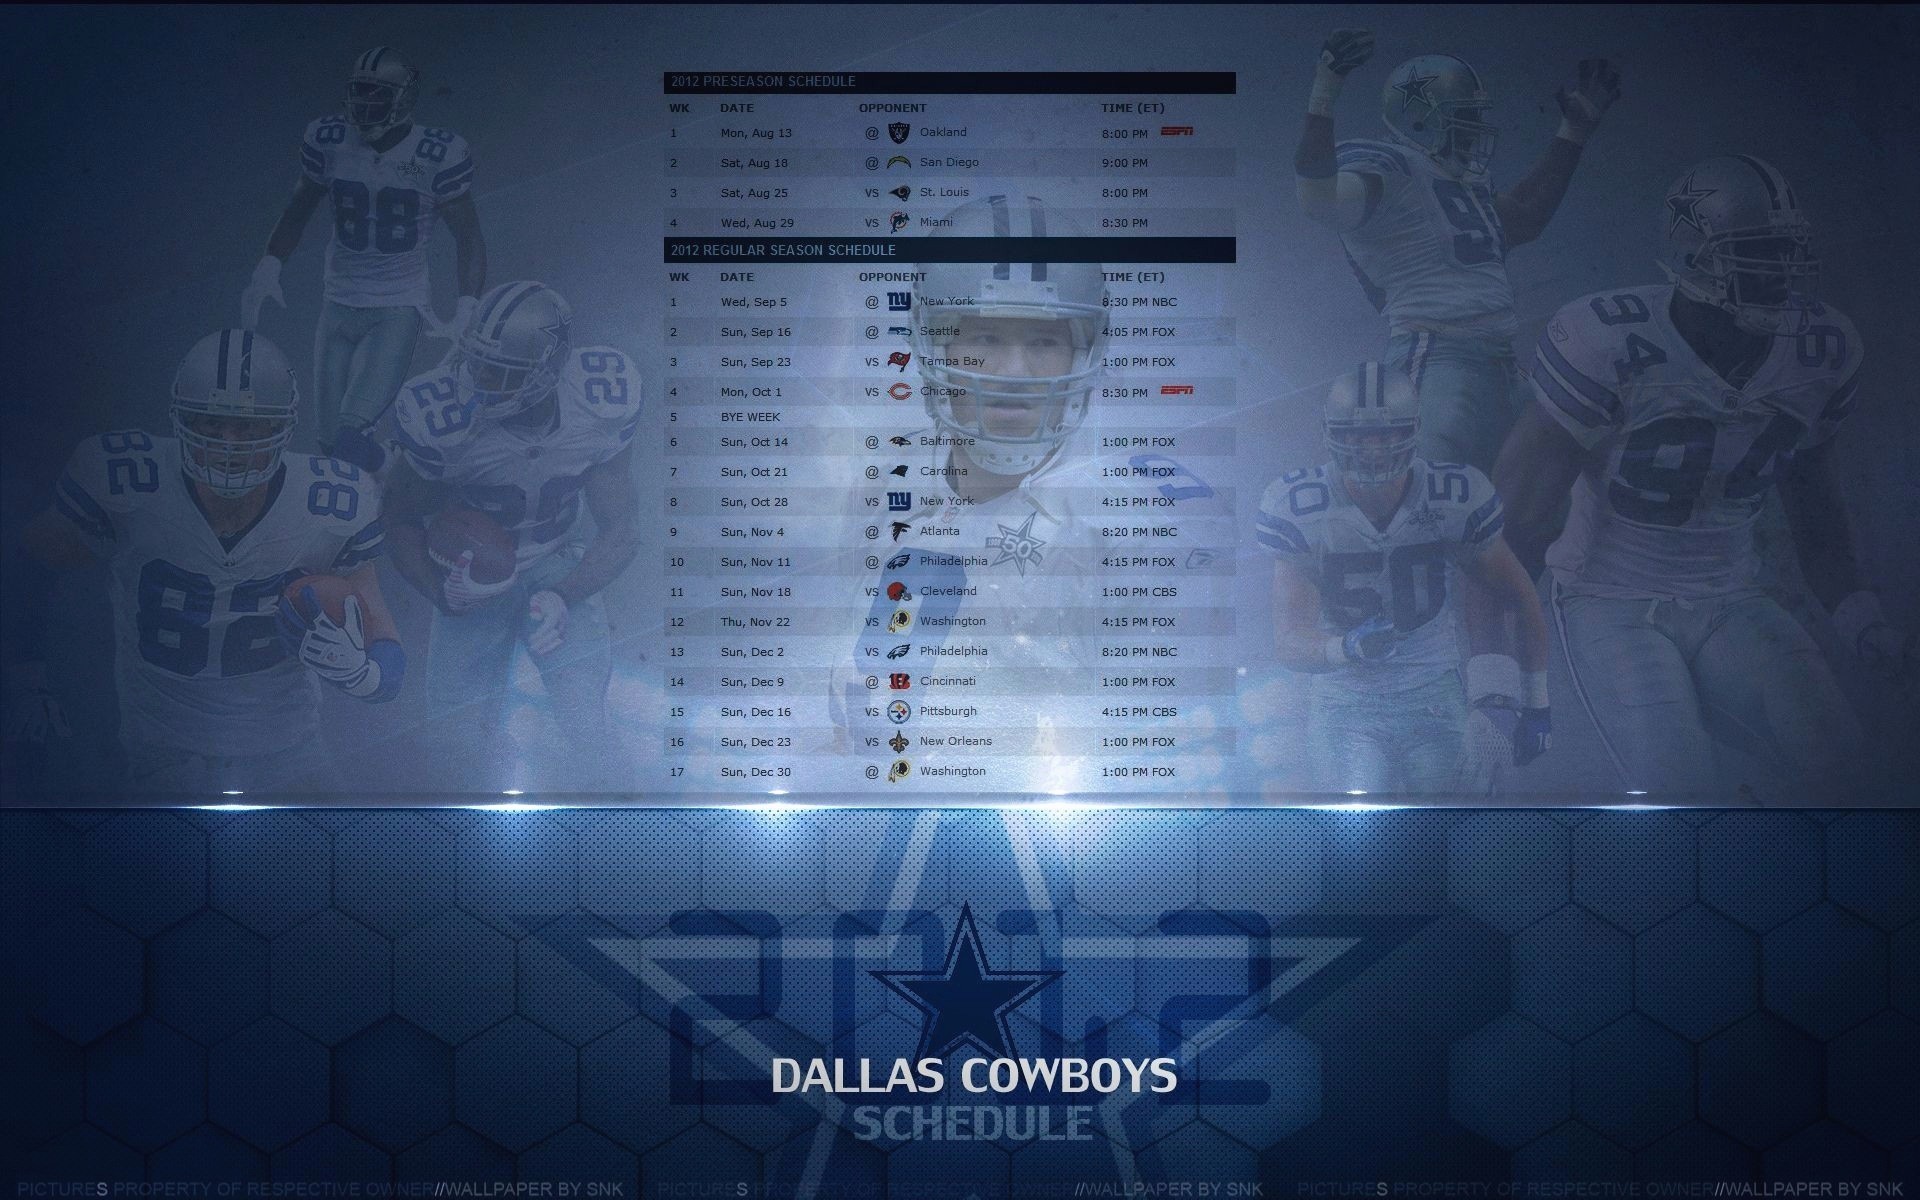 1920x1200 1920x1080 Full Hd For Dallas Cowboys Wallpaper Schedule High Resolution  Smartphone